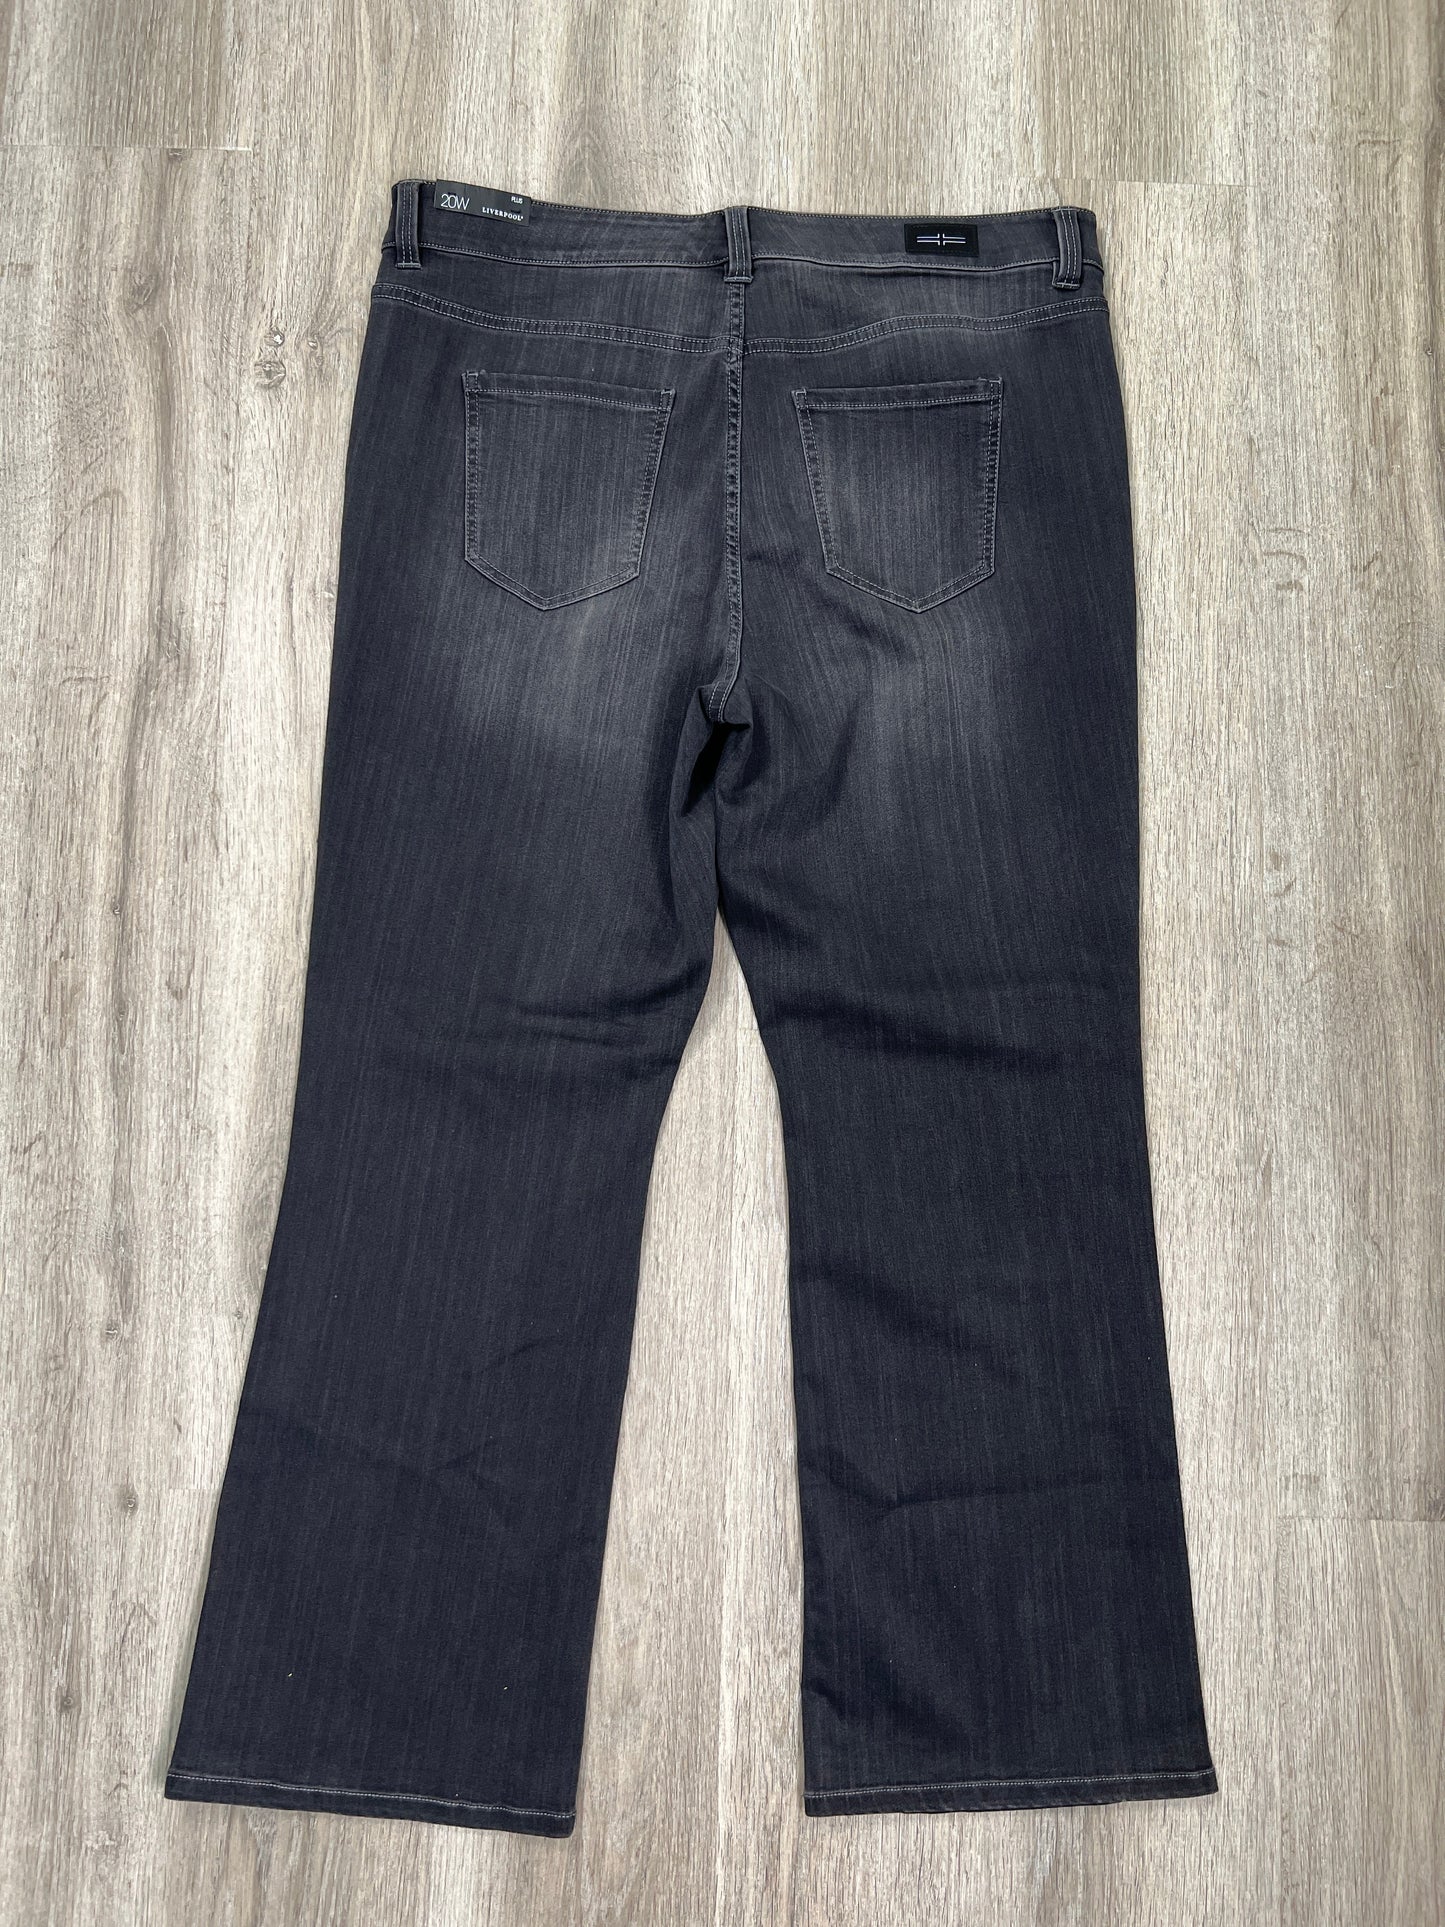 Jeans Boot Cut By Liverpool  Size: 20